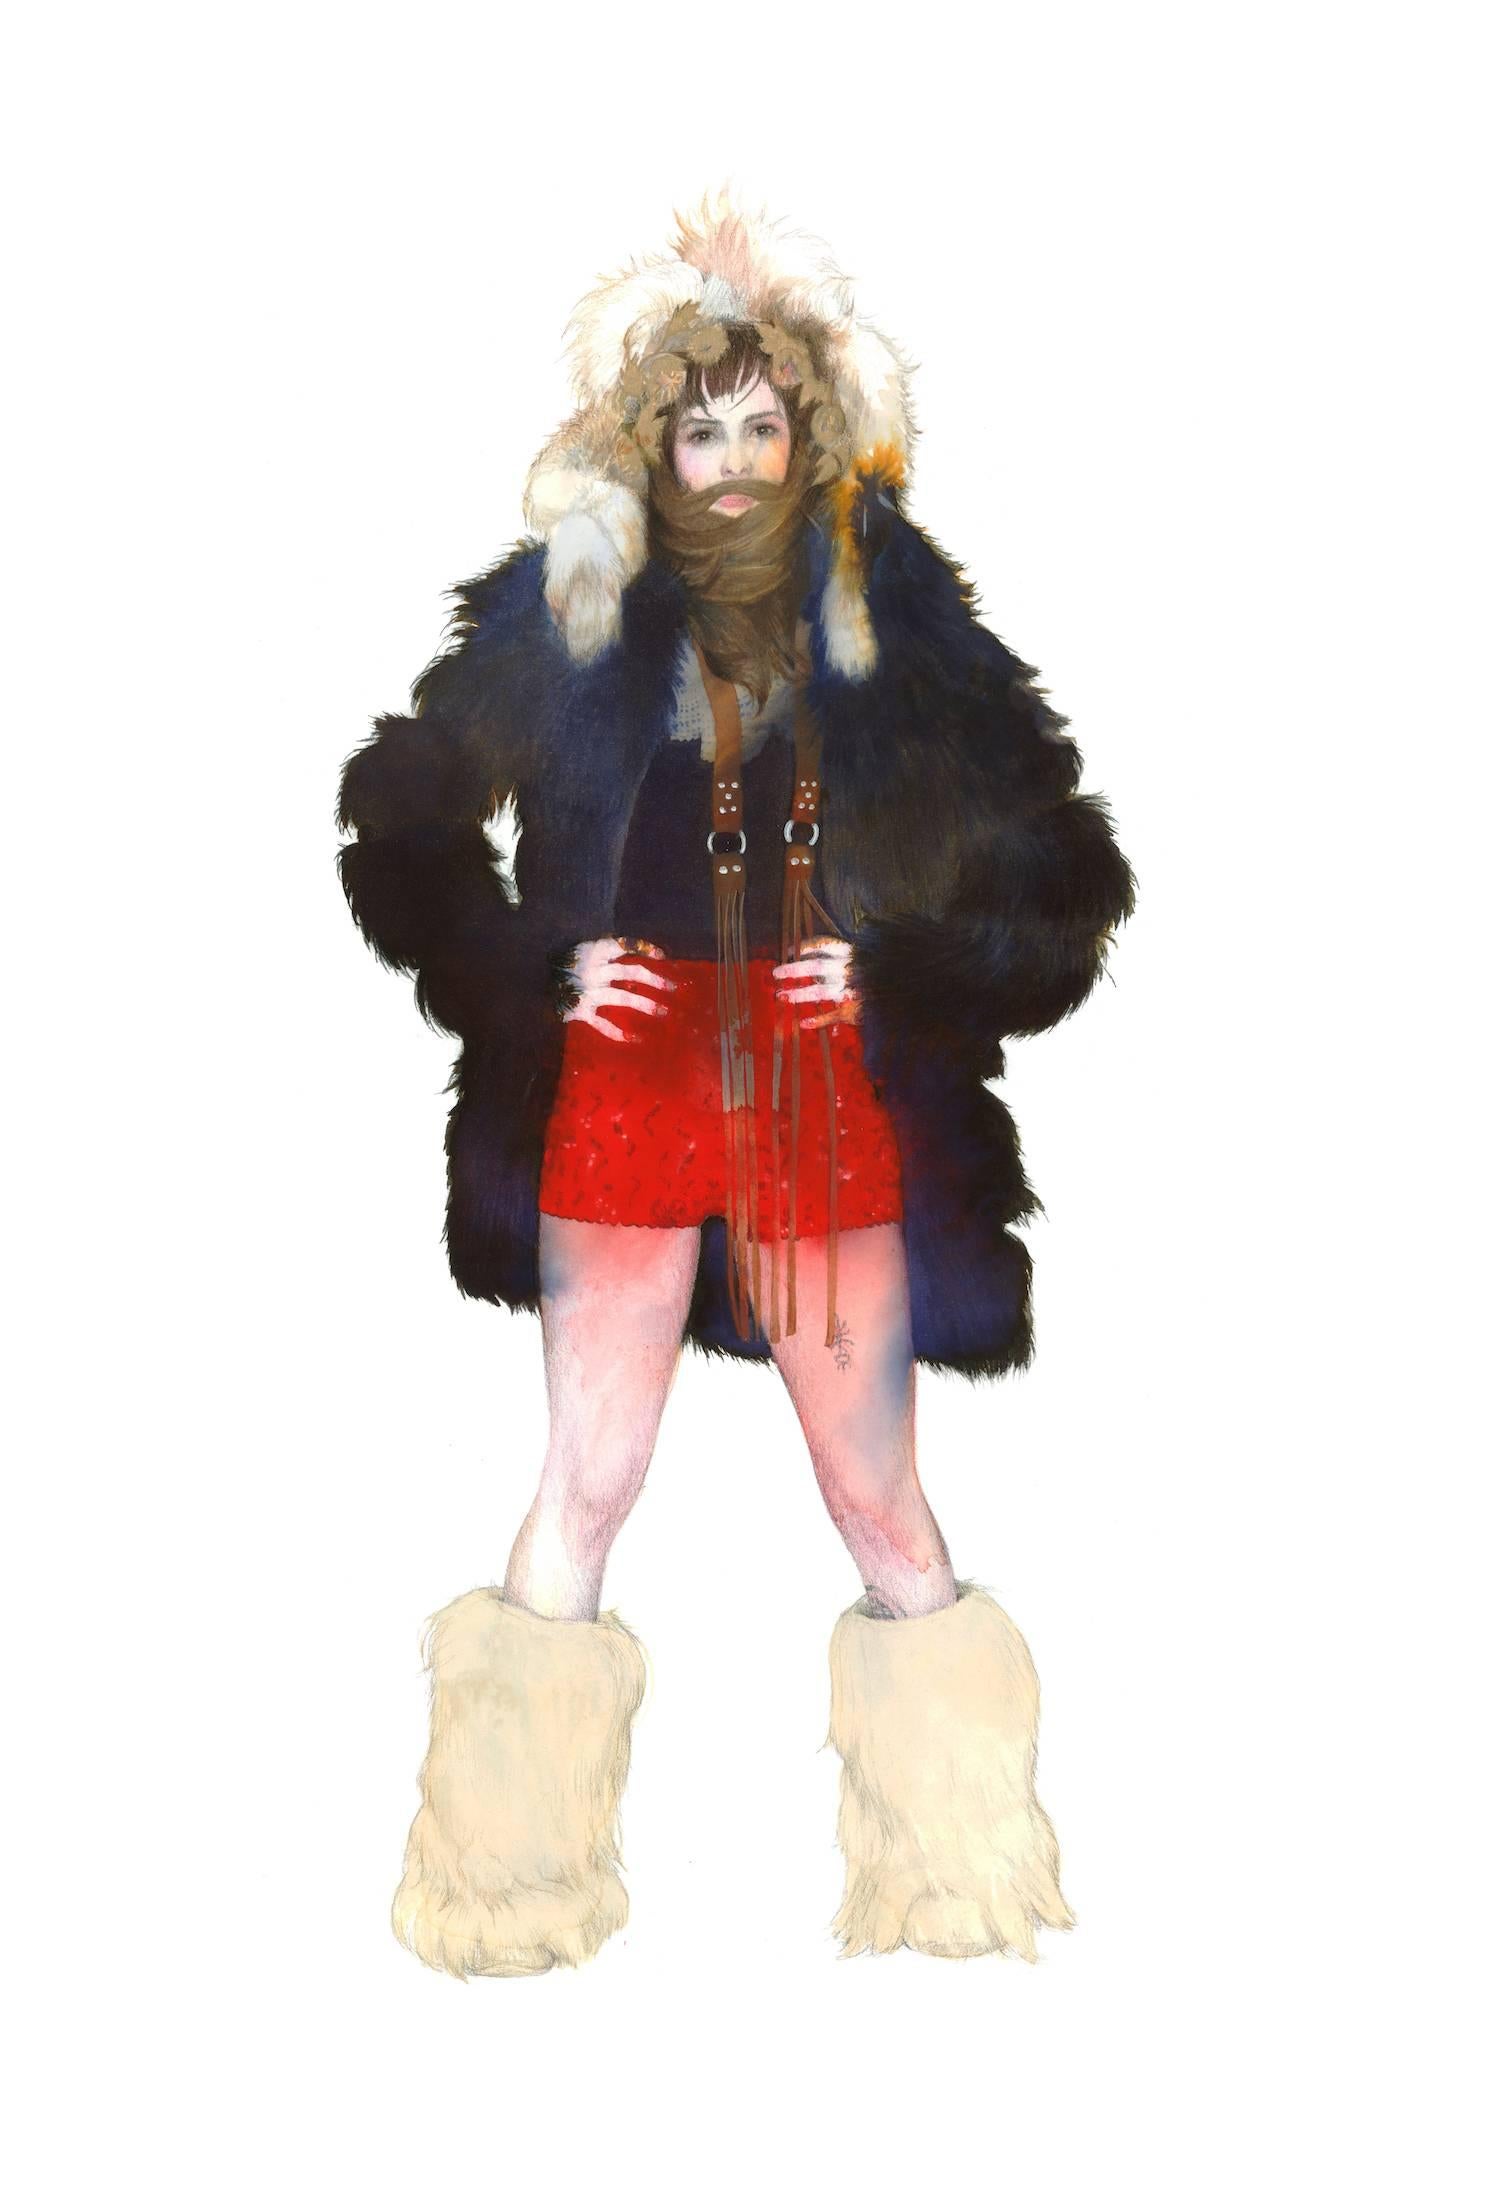 Beard & Hot Pants - Painting by June Glasson